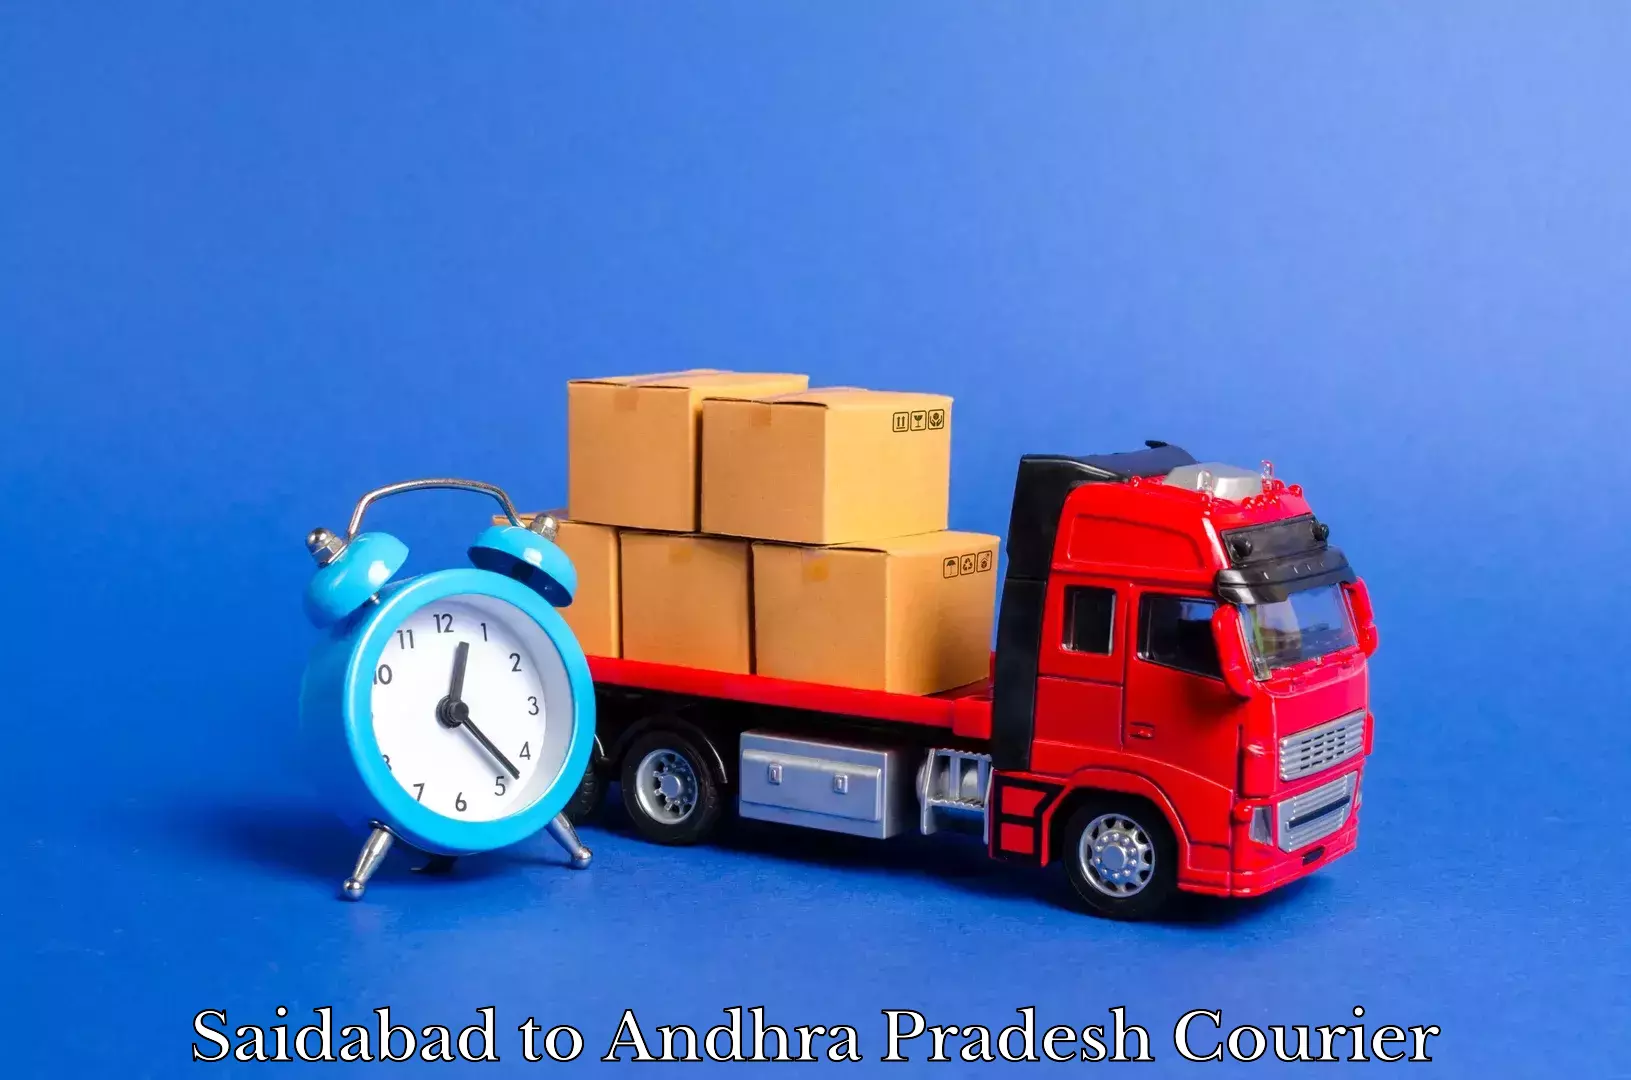 Personalized relocation plans in Saidabad to Chodavaram